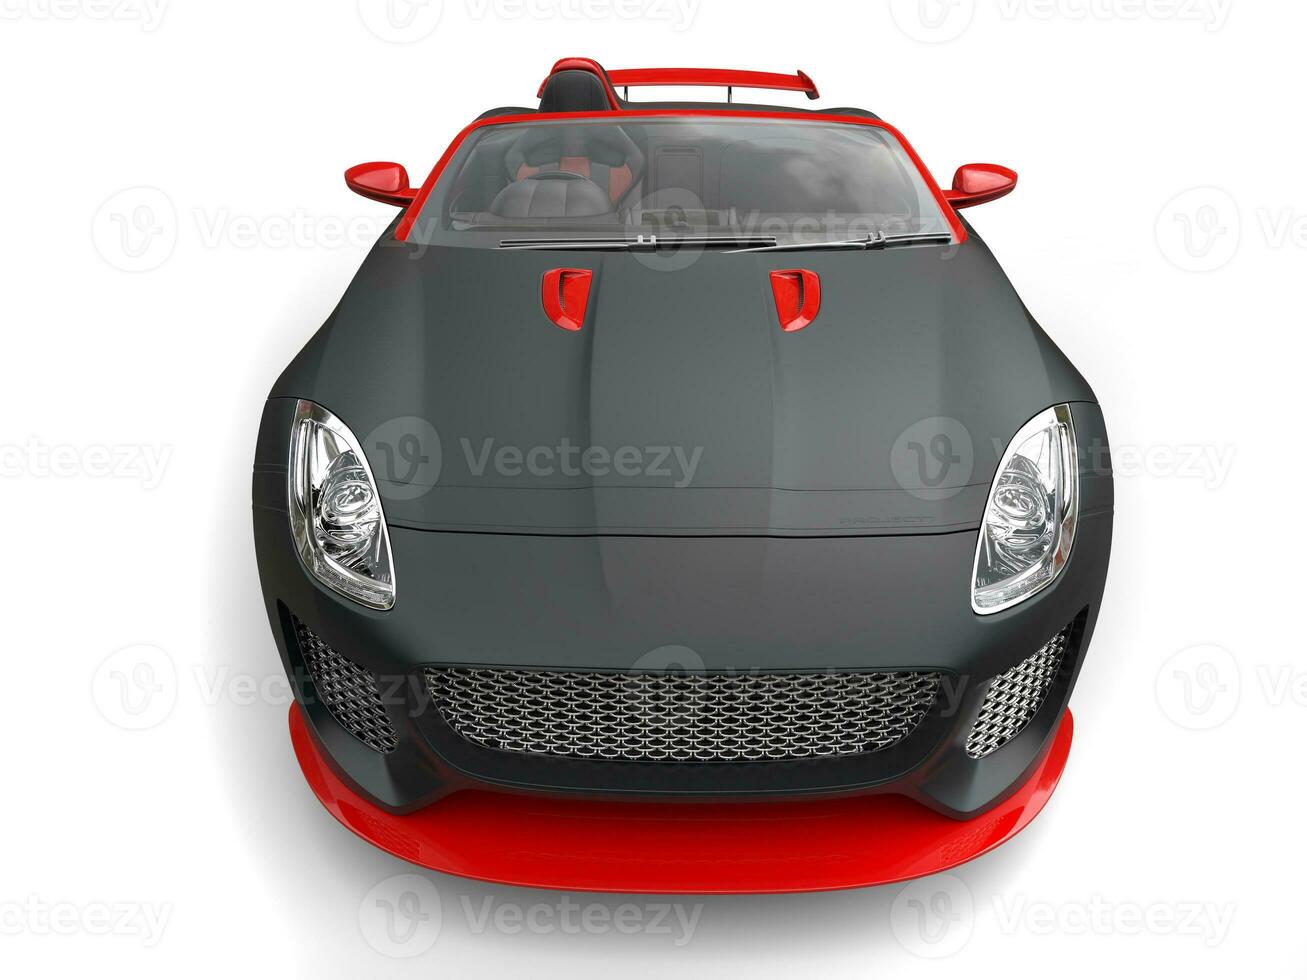 Awesome matte black super sports car with red details - front view photo